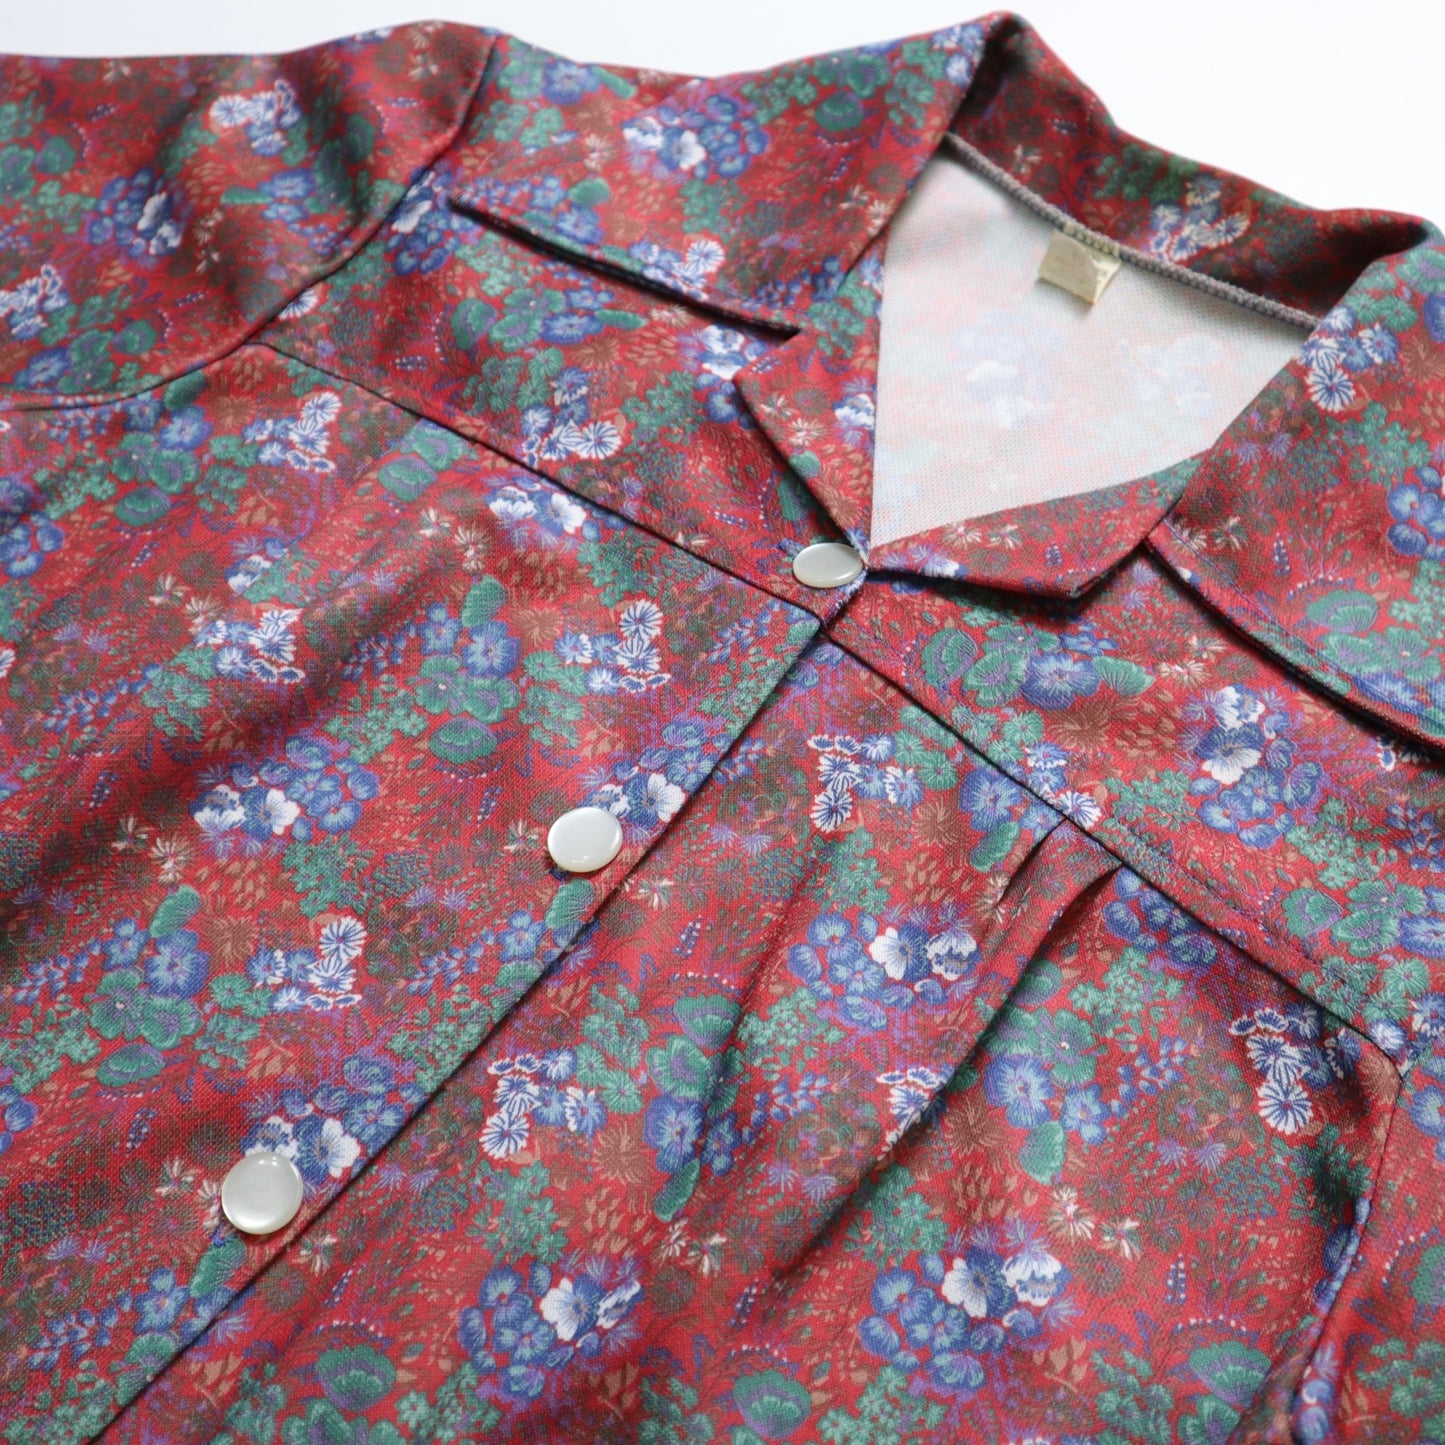 1980s American made red printed arrow collar shirt polyester fabric